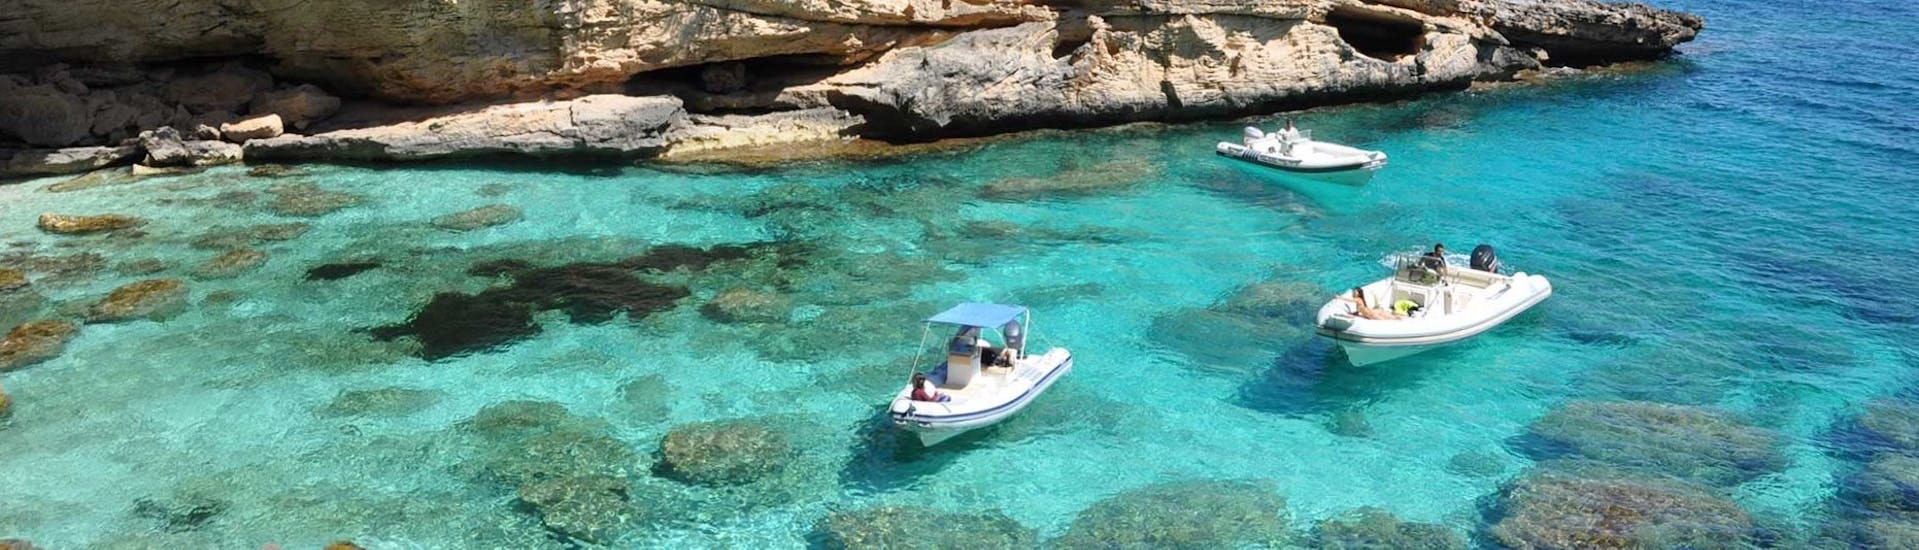 View of some rib boats in the clear Sardinian waters during the Boat Rental in Arbatax (up to 2 people) with Flamar Vacanze Arbatax.